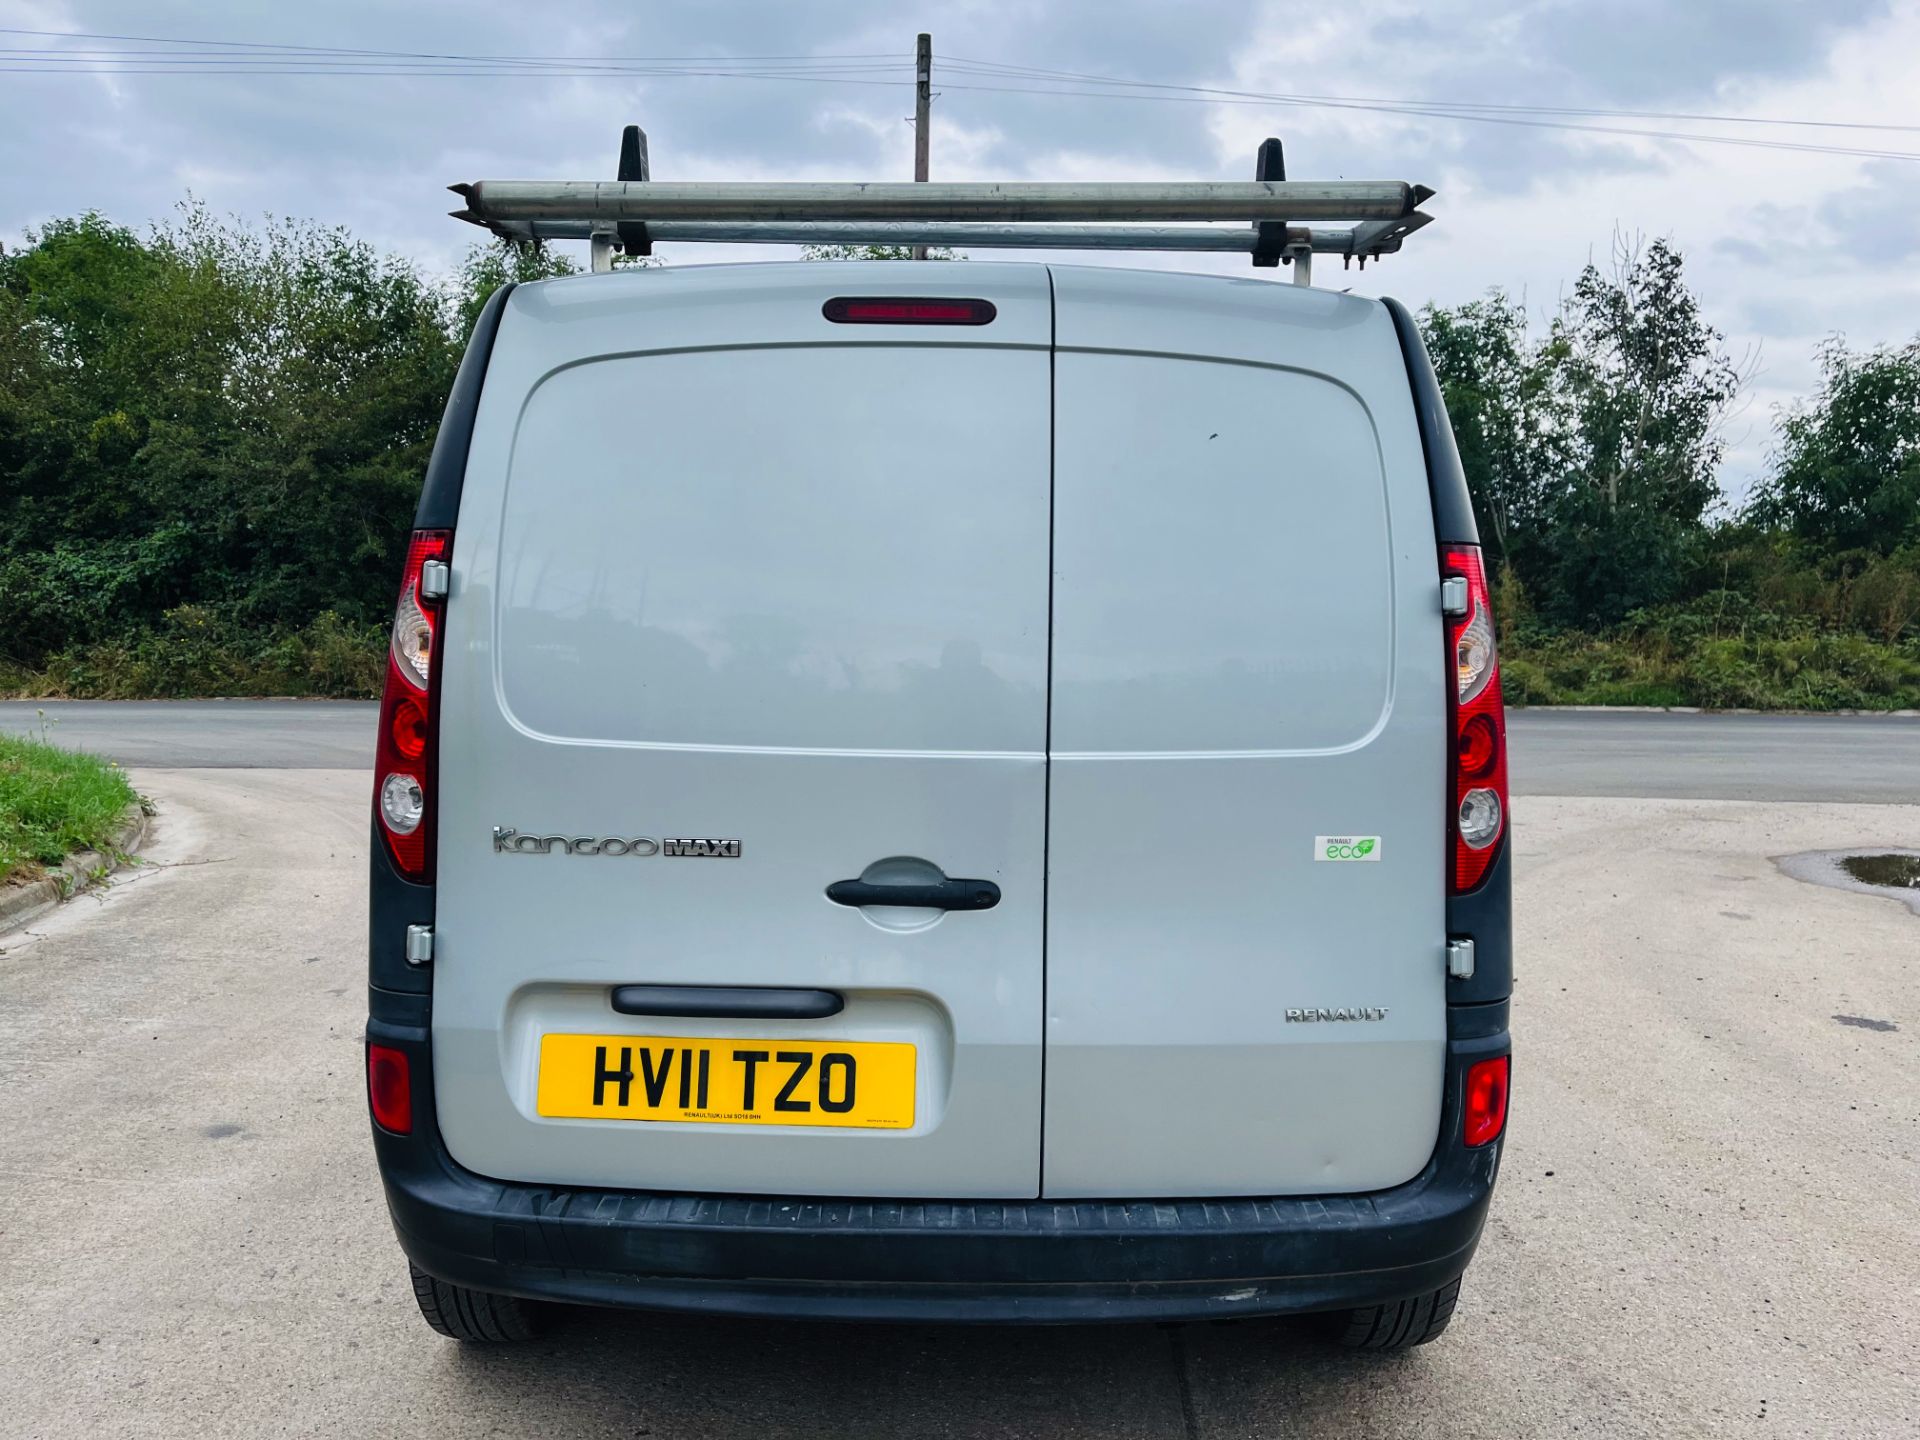 (Reserve Met) Renault Kangoo dci "Maxi Plus" 11reg - Rare and hard to find a Maxi Plus model -No Vat - Image 9 of 18